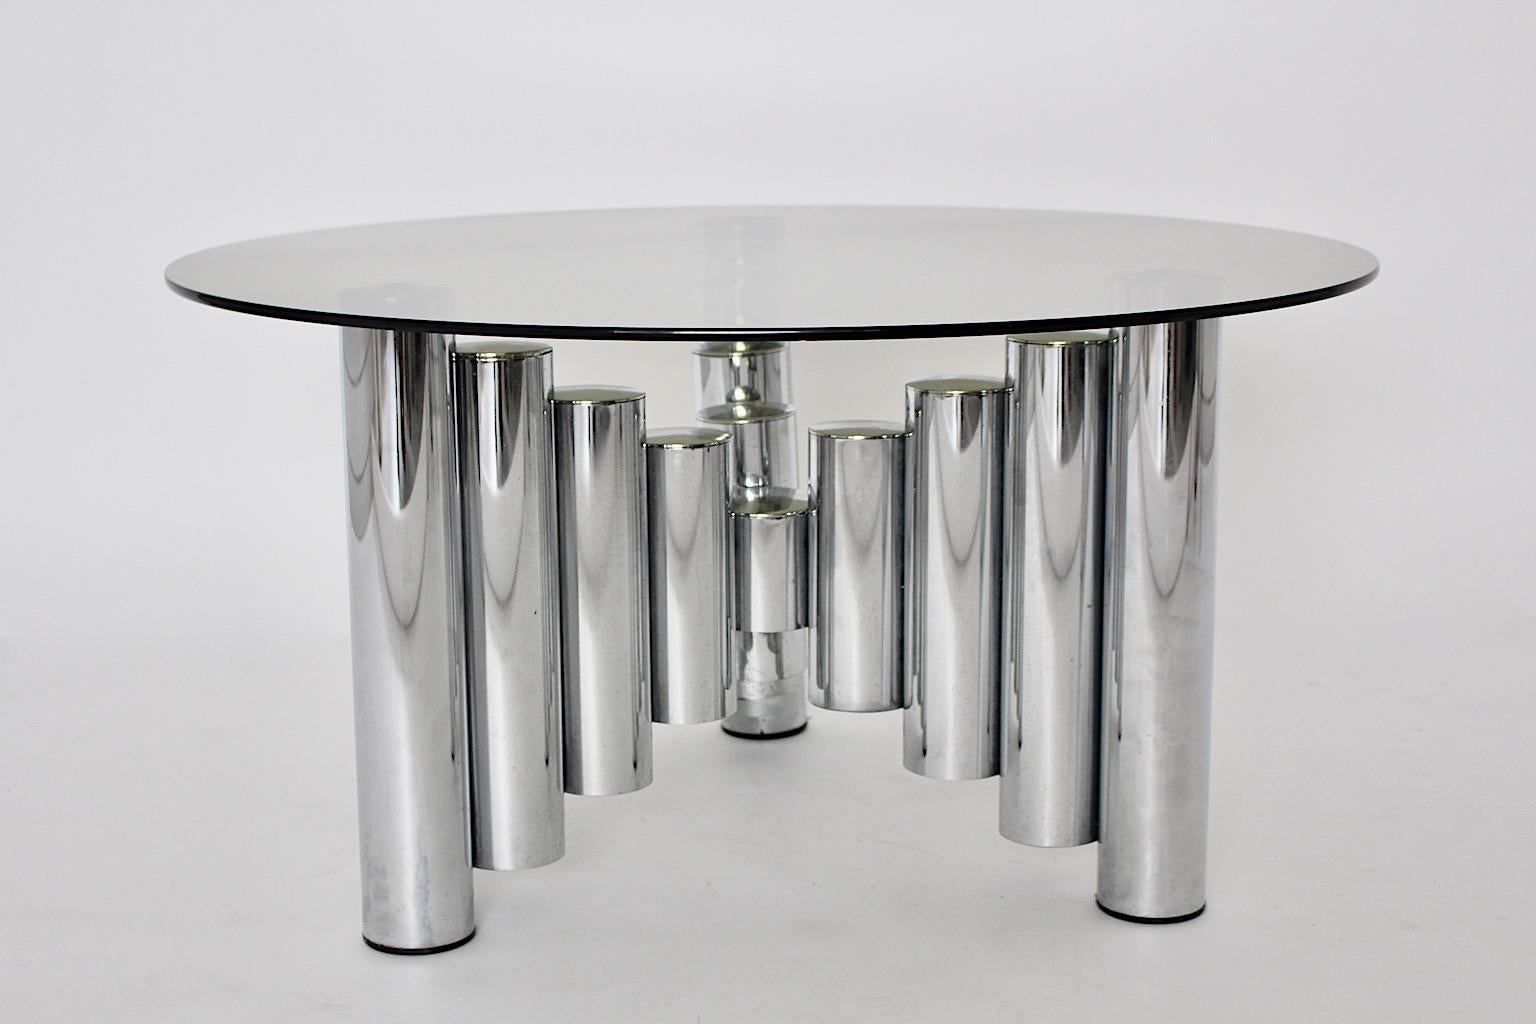 Modernist sculptural circular like vintage coffee table from chromed metal base and a greenish glass top, 1960s Italy.
A wonderful chromed coffee table topped with greenish glass plate. 
This coffee table with lined chromed metal tubes in